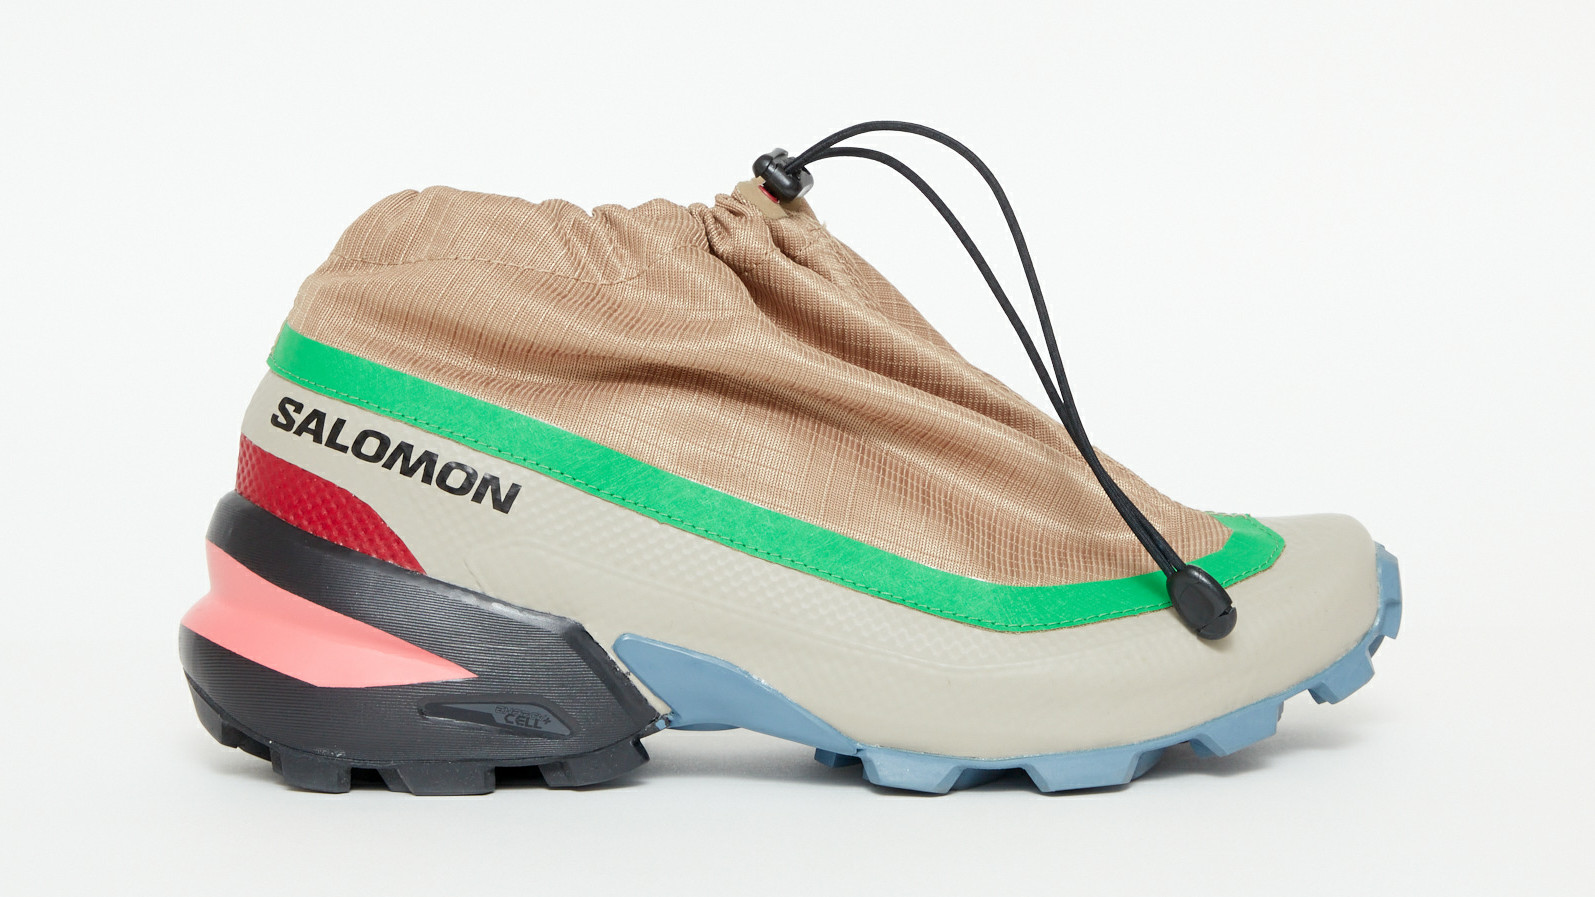 Salomon and Maison Margiela's First Collab Drops This Week   Complex